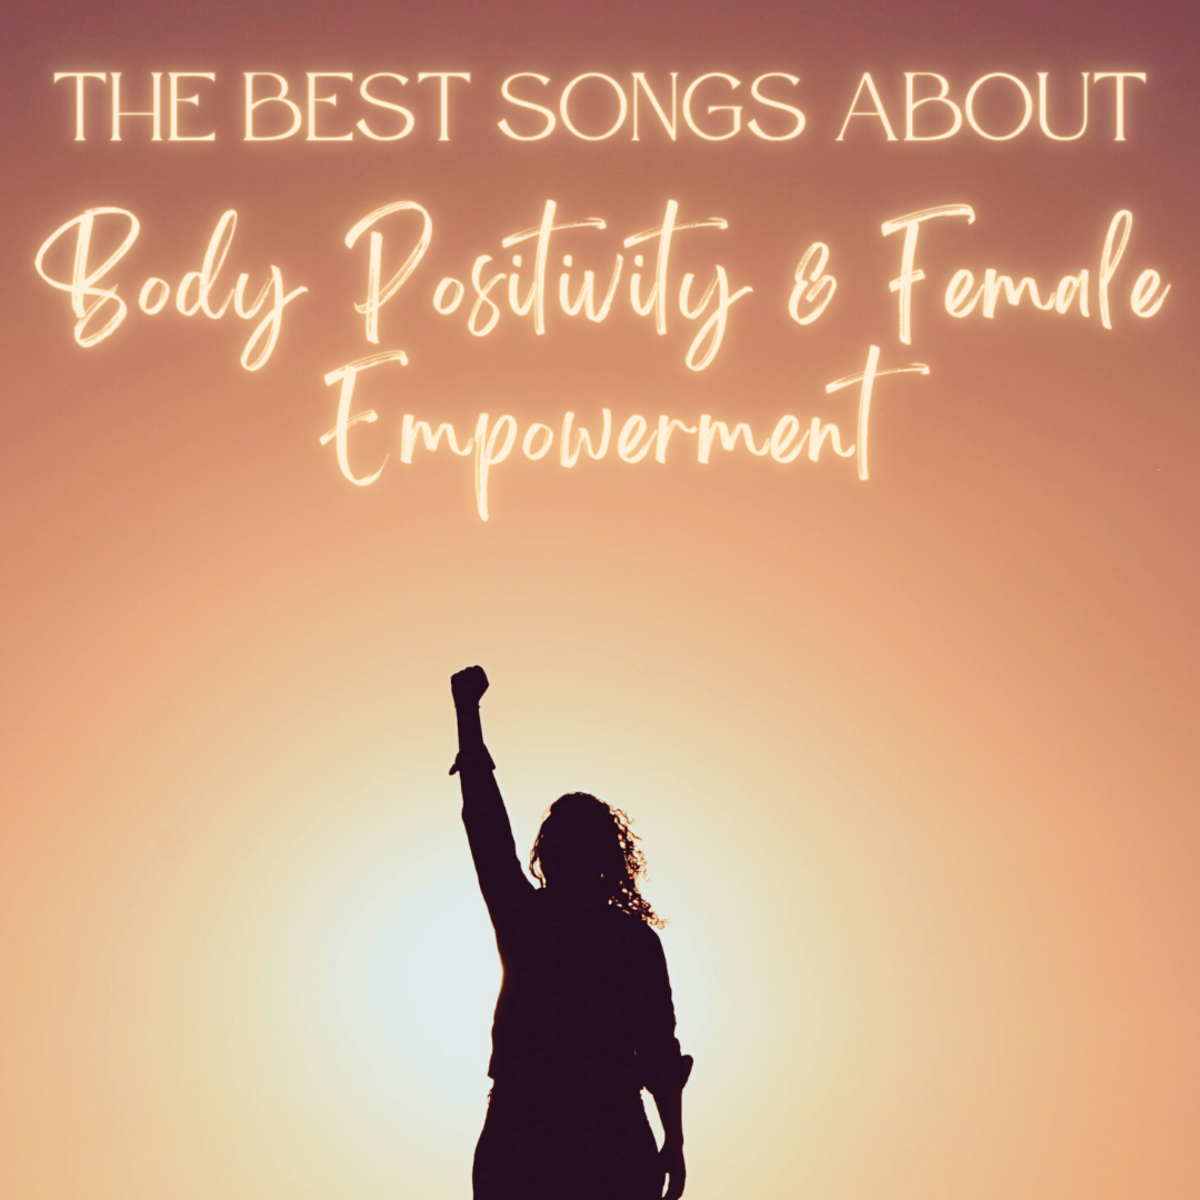 A list of the best songs body-positive songs out there